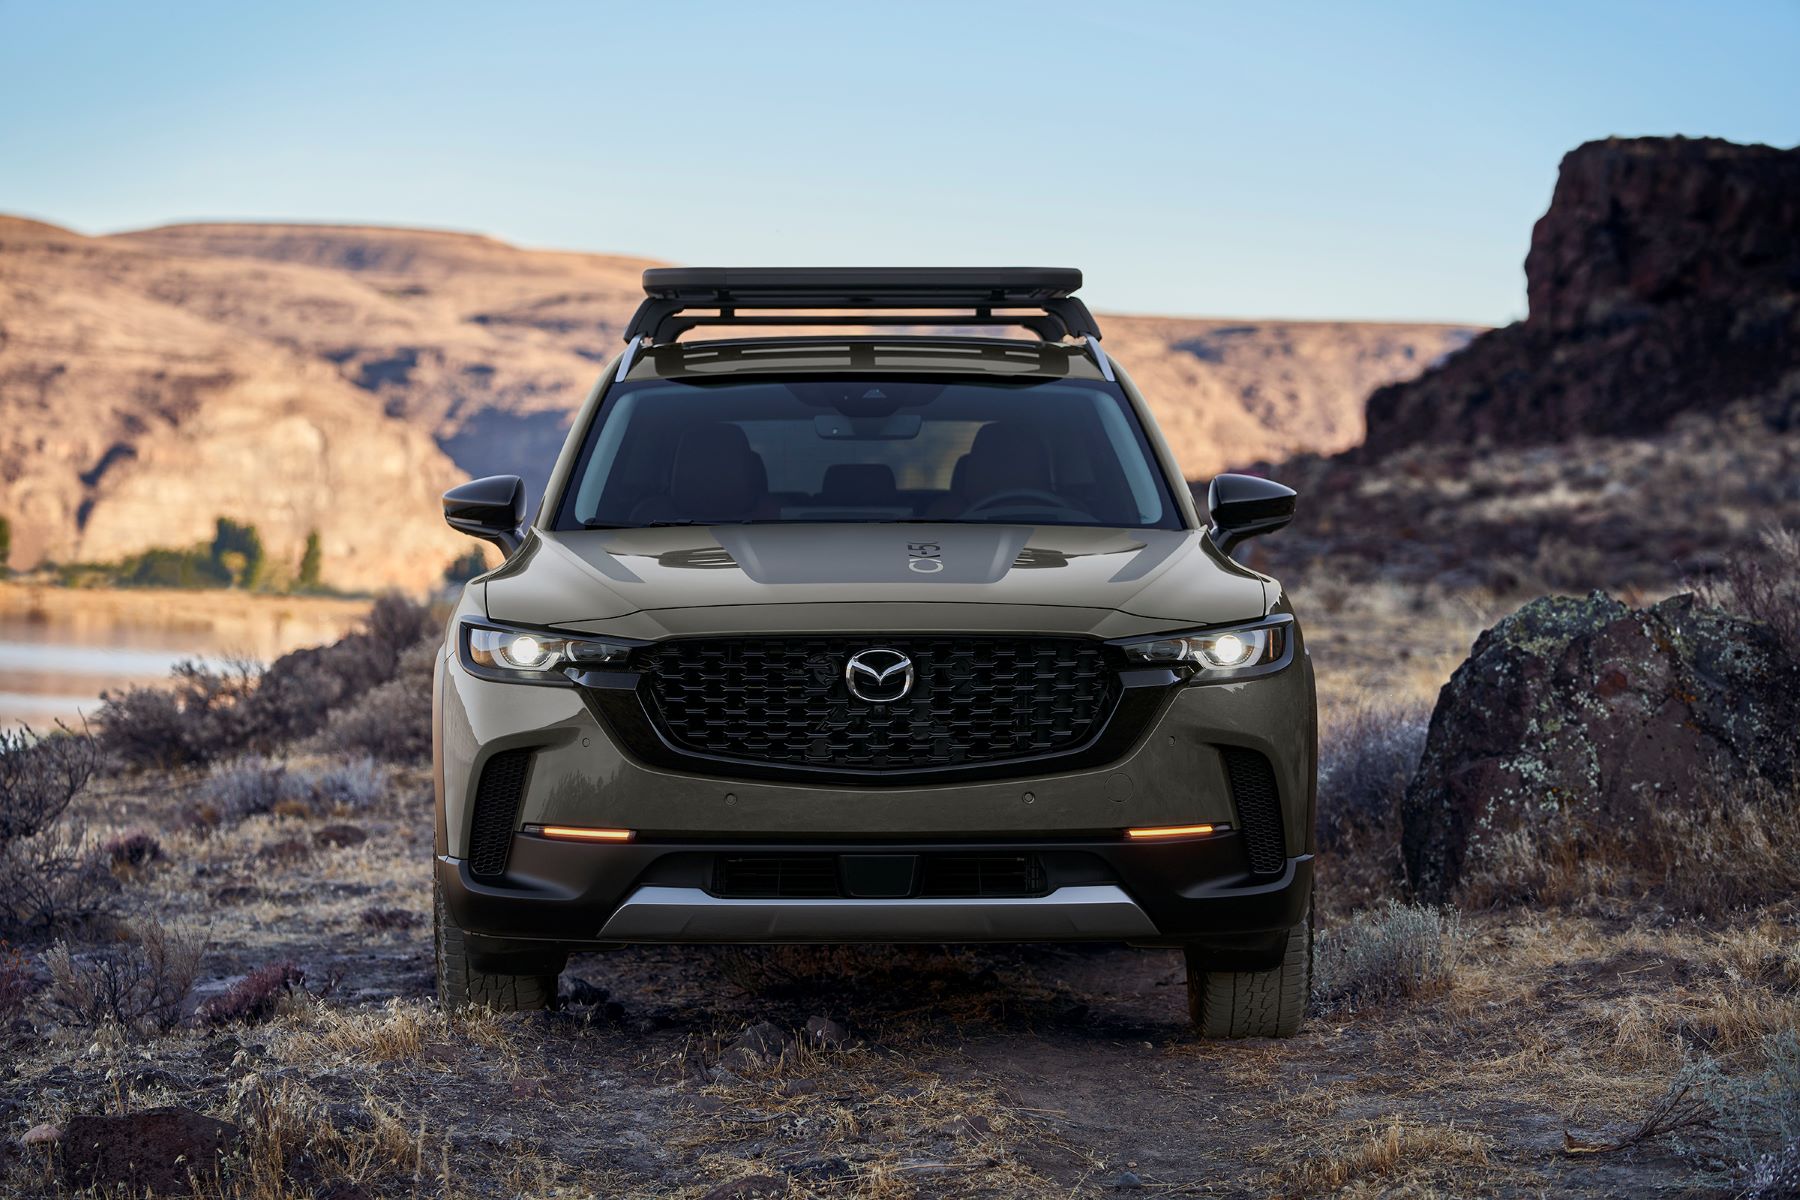 A 2023 Mazda CX-50 compact crossover SUV with a roof-rack parked on off-road terrain